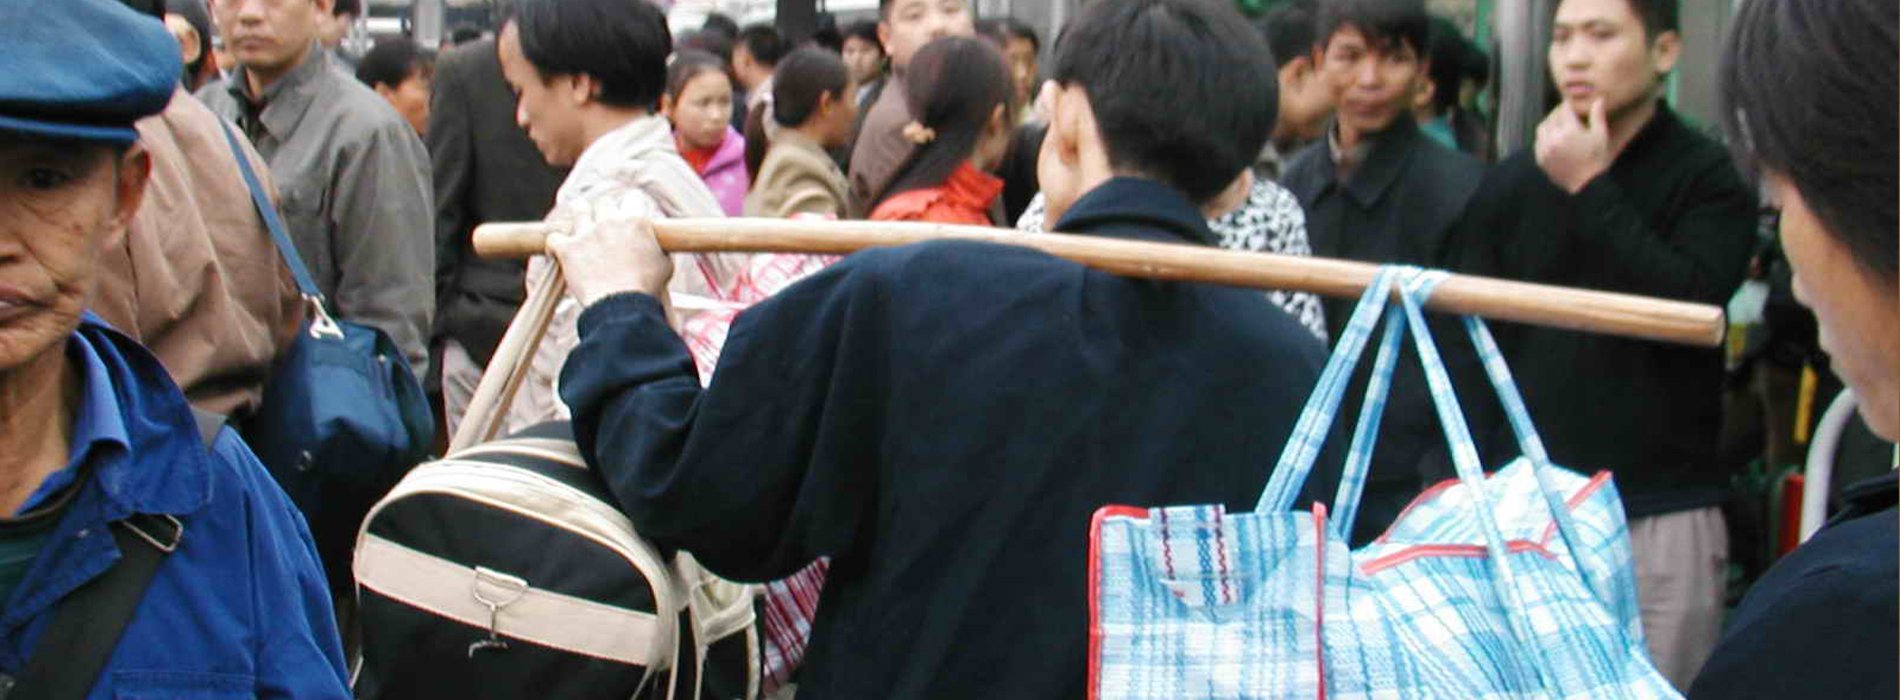 A man walks through a crowd in China, using a wooden pole to carry two large bags slung over his shoulder. One is a light-blue plaid pattern and the other is black with white trim.